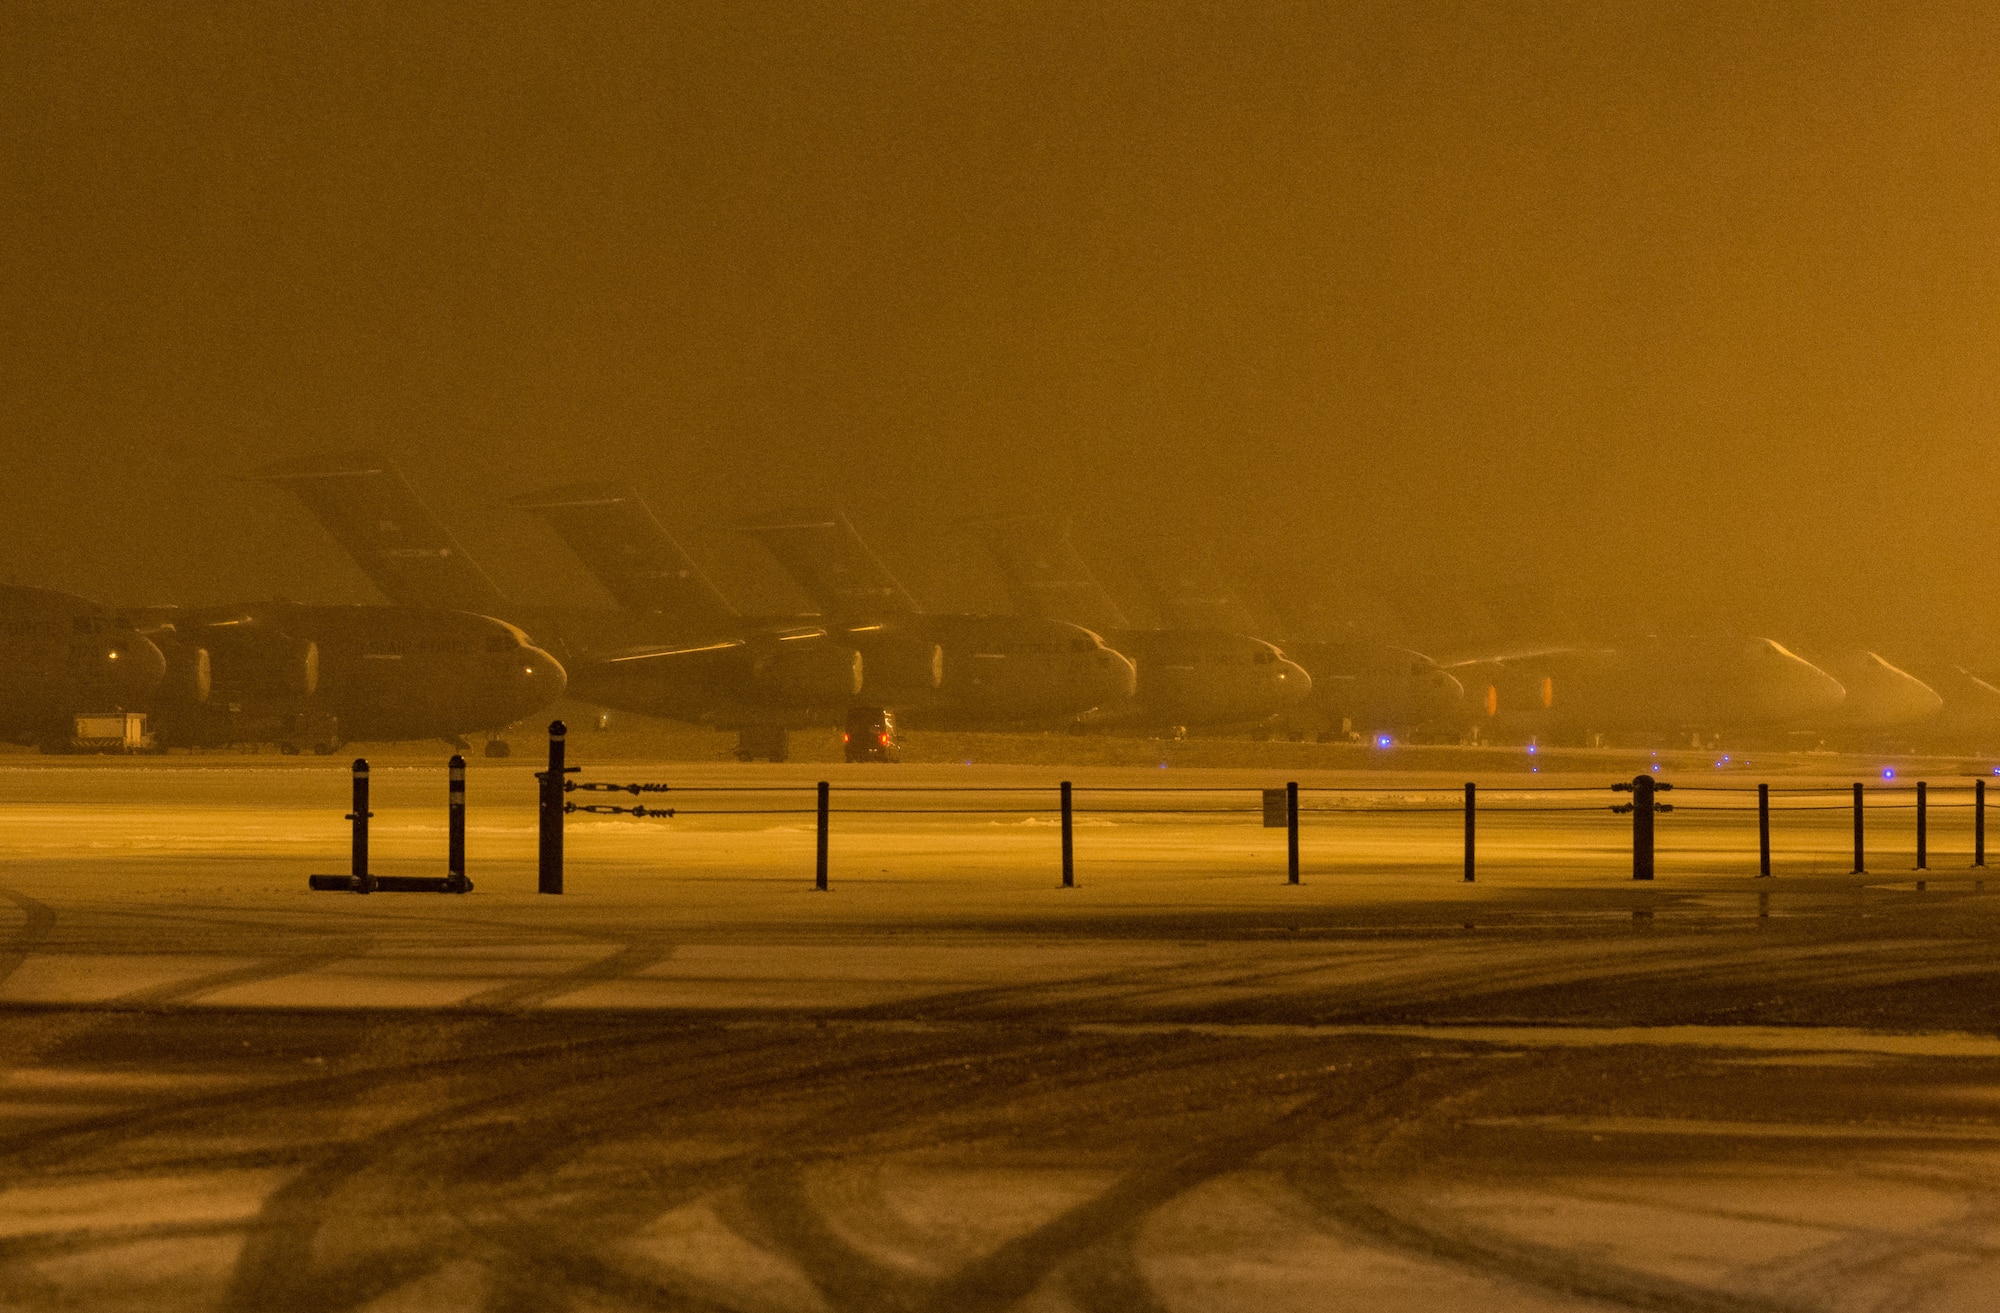 C-17 Globemaster III and C-5M Super Galaxy aircraft sit on the snow-covered flight line at Dover Air Force Base, Delaware, Feb. 1, 2021. As snow fell, the base continued normal operations and prepared for additional forecast snowfall during the next few days. (U.S. Air Force photo by Roland Balik)